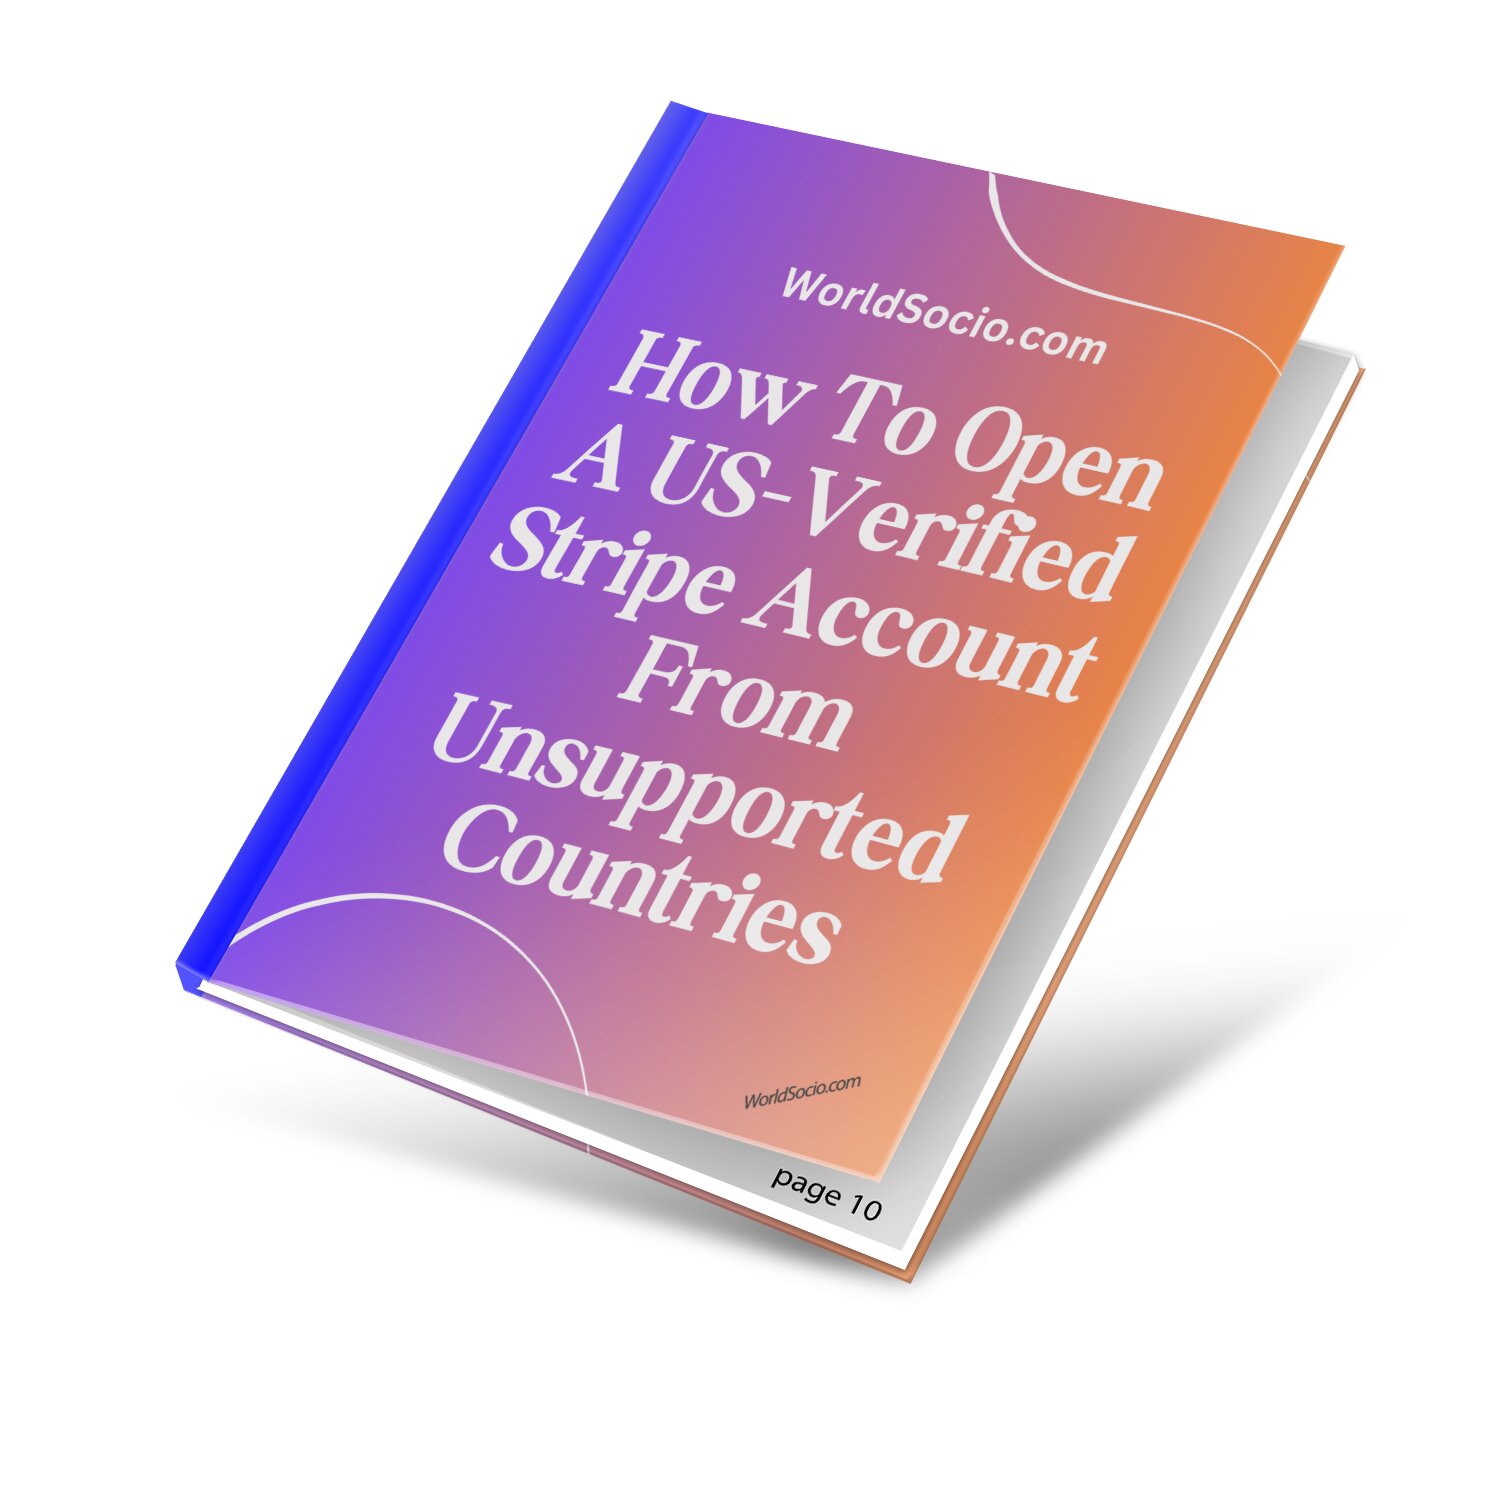 how-to-open-a-us-verified-stripe-account-from-unsupported-countries-worldsocio-jpg.1455